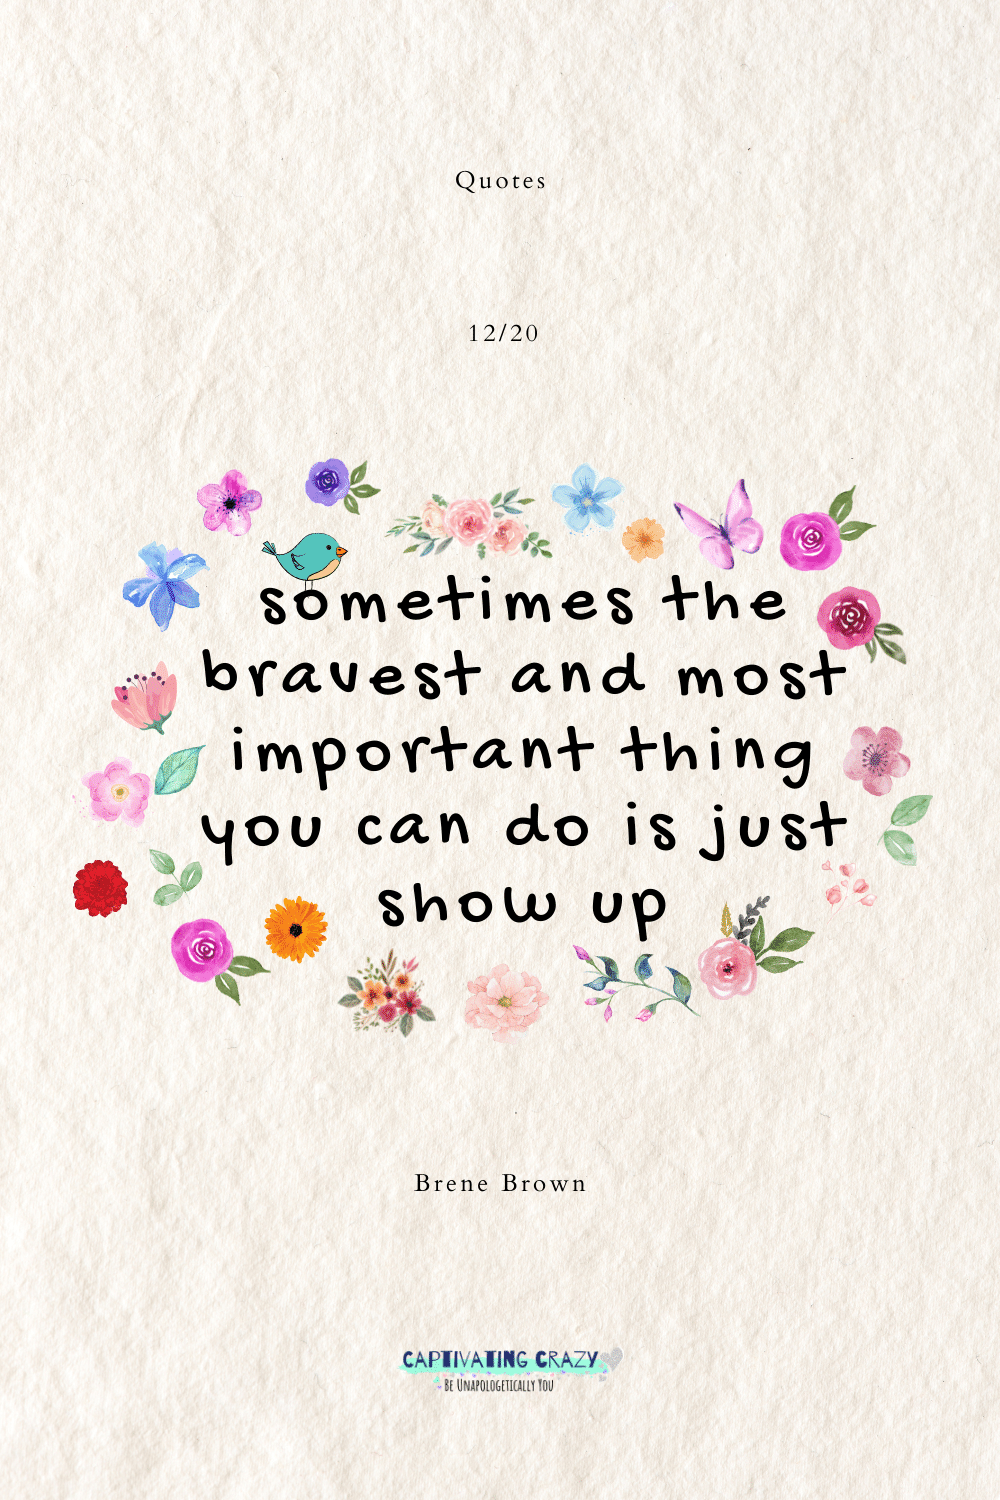 Sometimes the bravest and most important thing you can do is just show up. Brene Brown